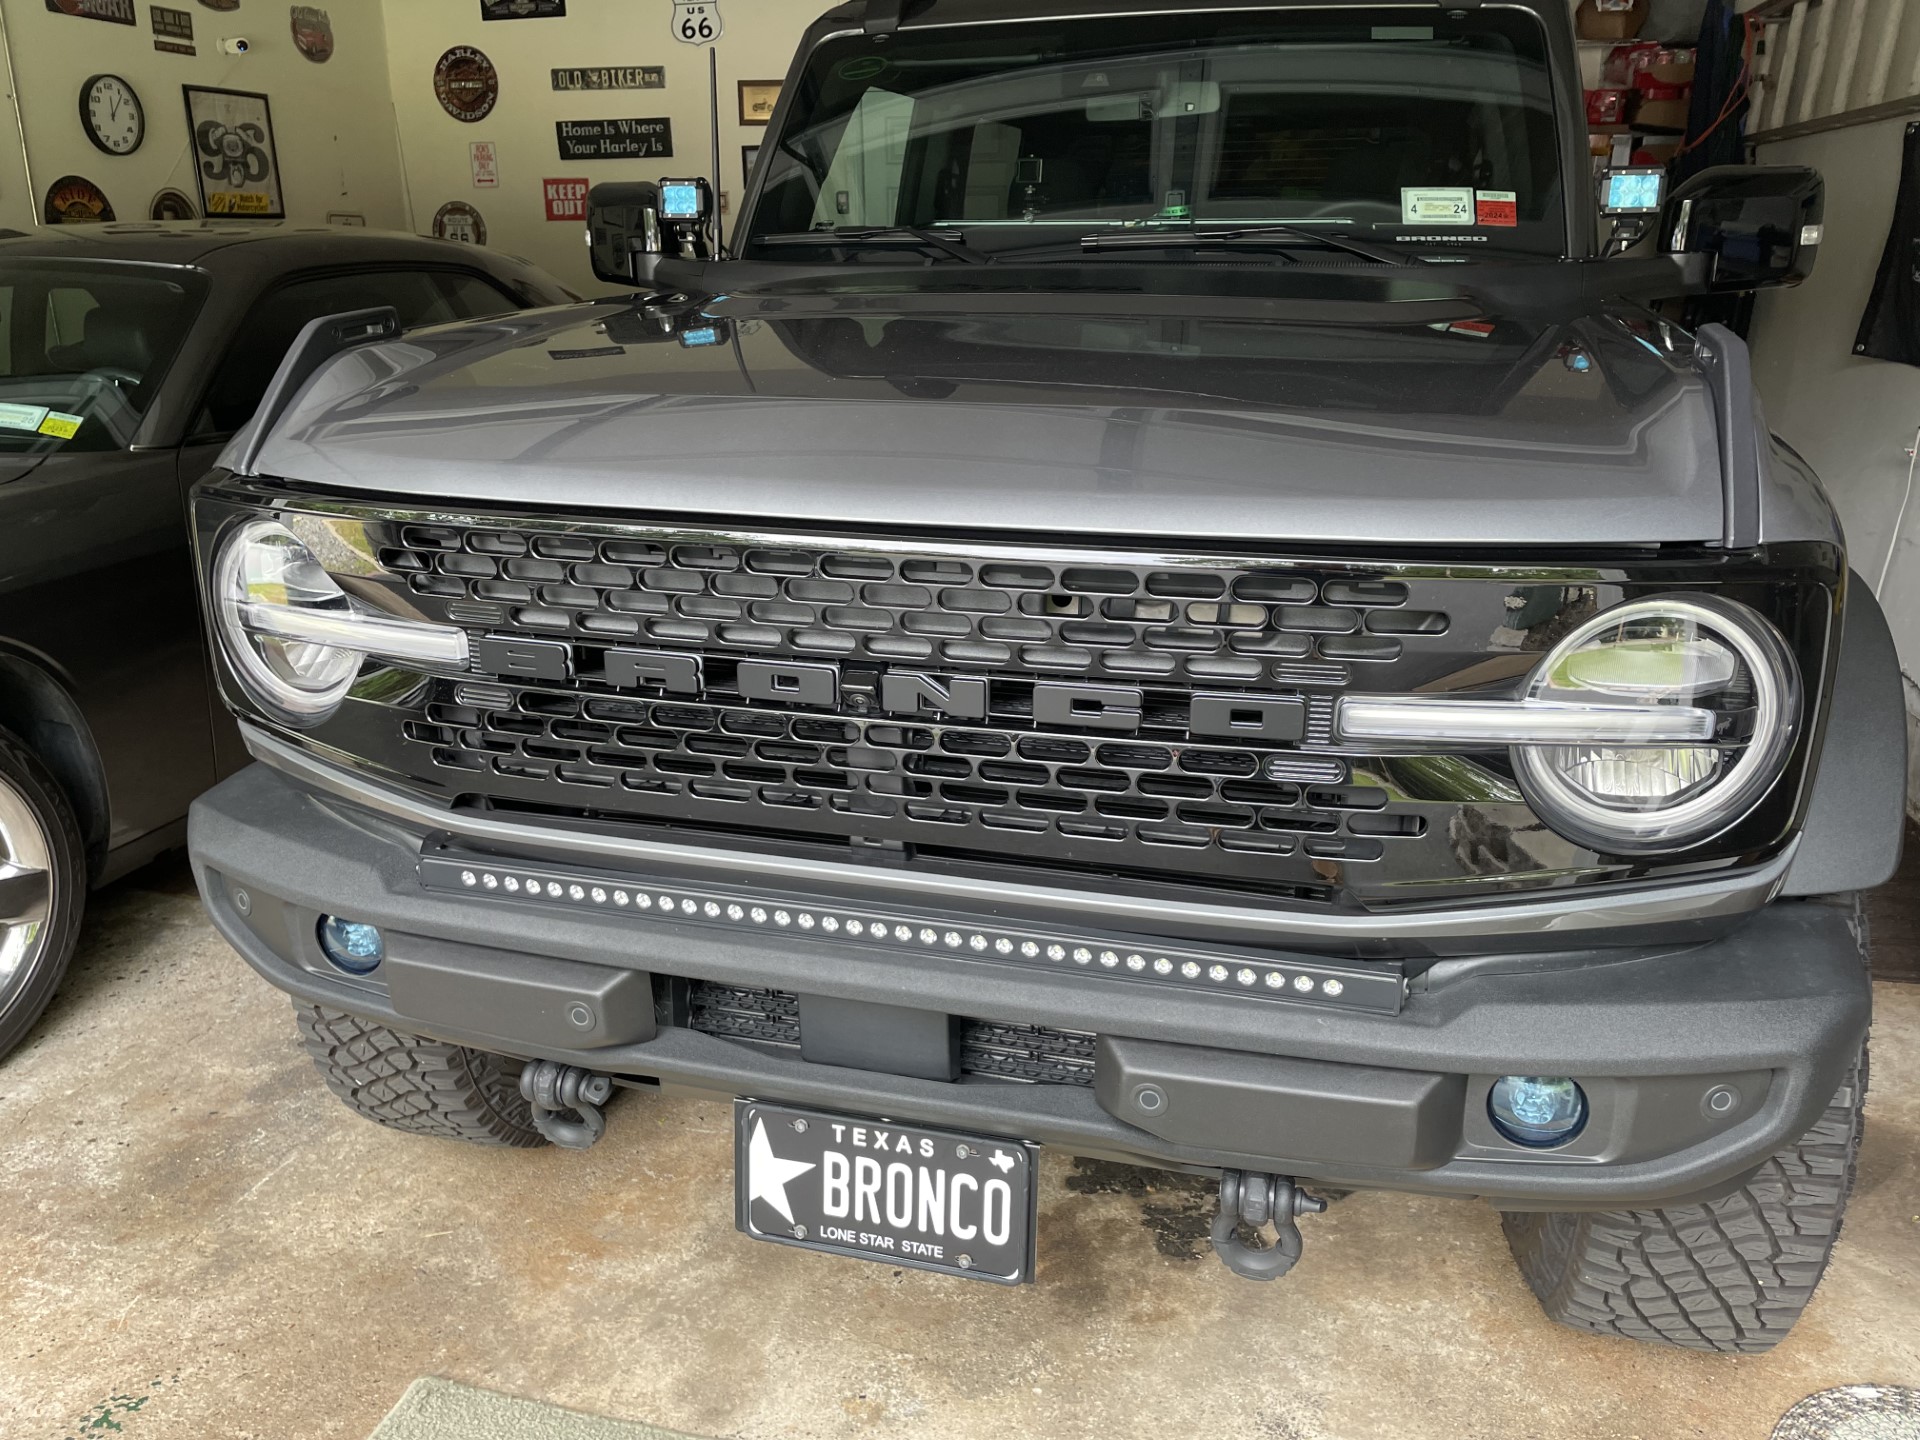 Ford Bronco Big Bend Grille Mod: Inserts and Overlay Letters Blue lights off